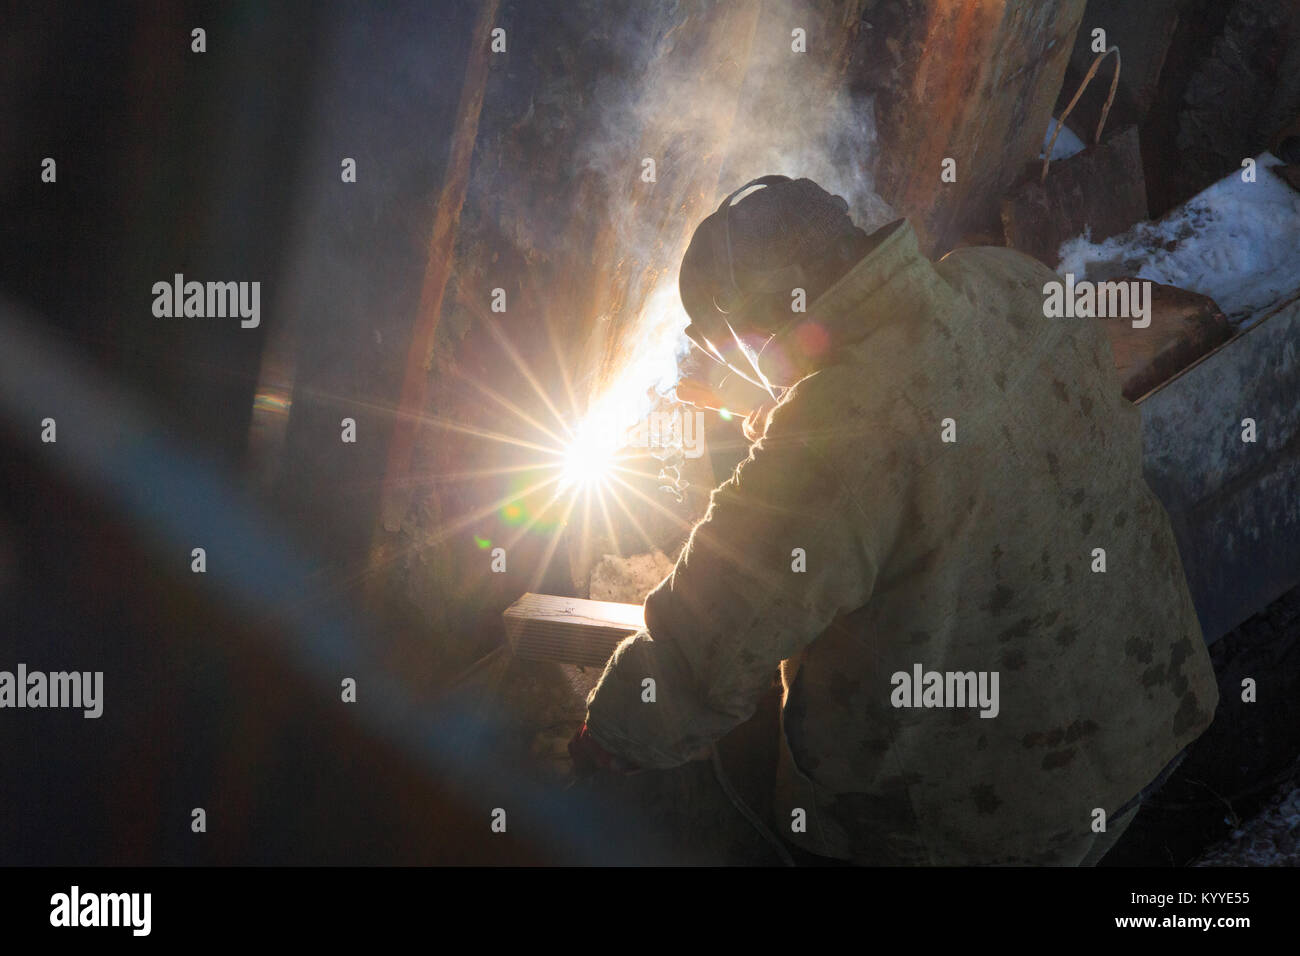 Welder from the back, in backlight from electric welding. Stock Photo